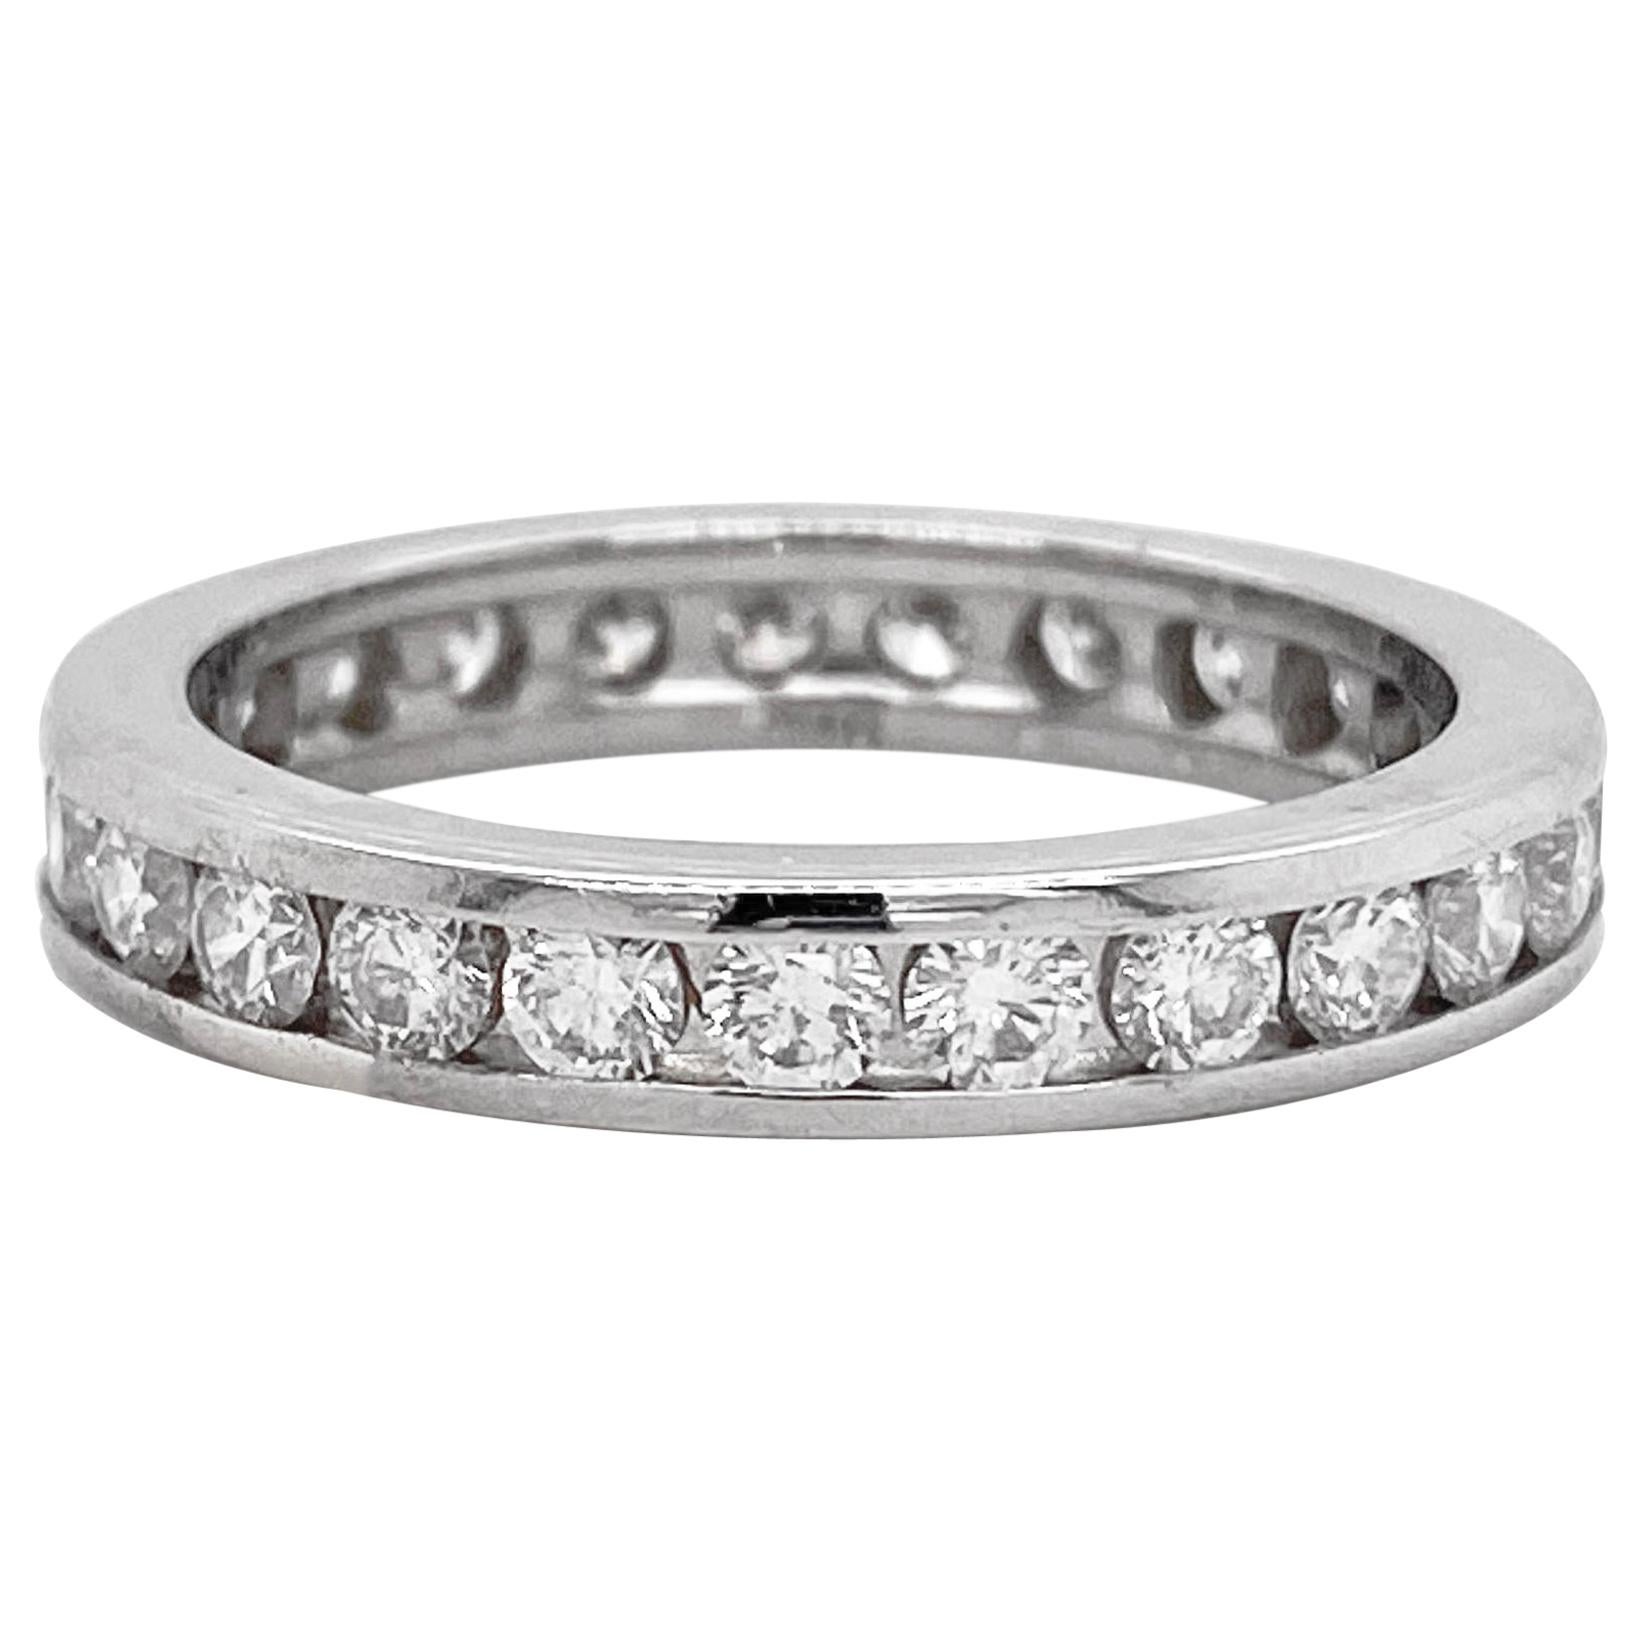 Channel Eternity Band Ring, White Gold, 1.50 Carat Diamond, Infinity For Sale